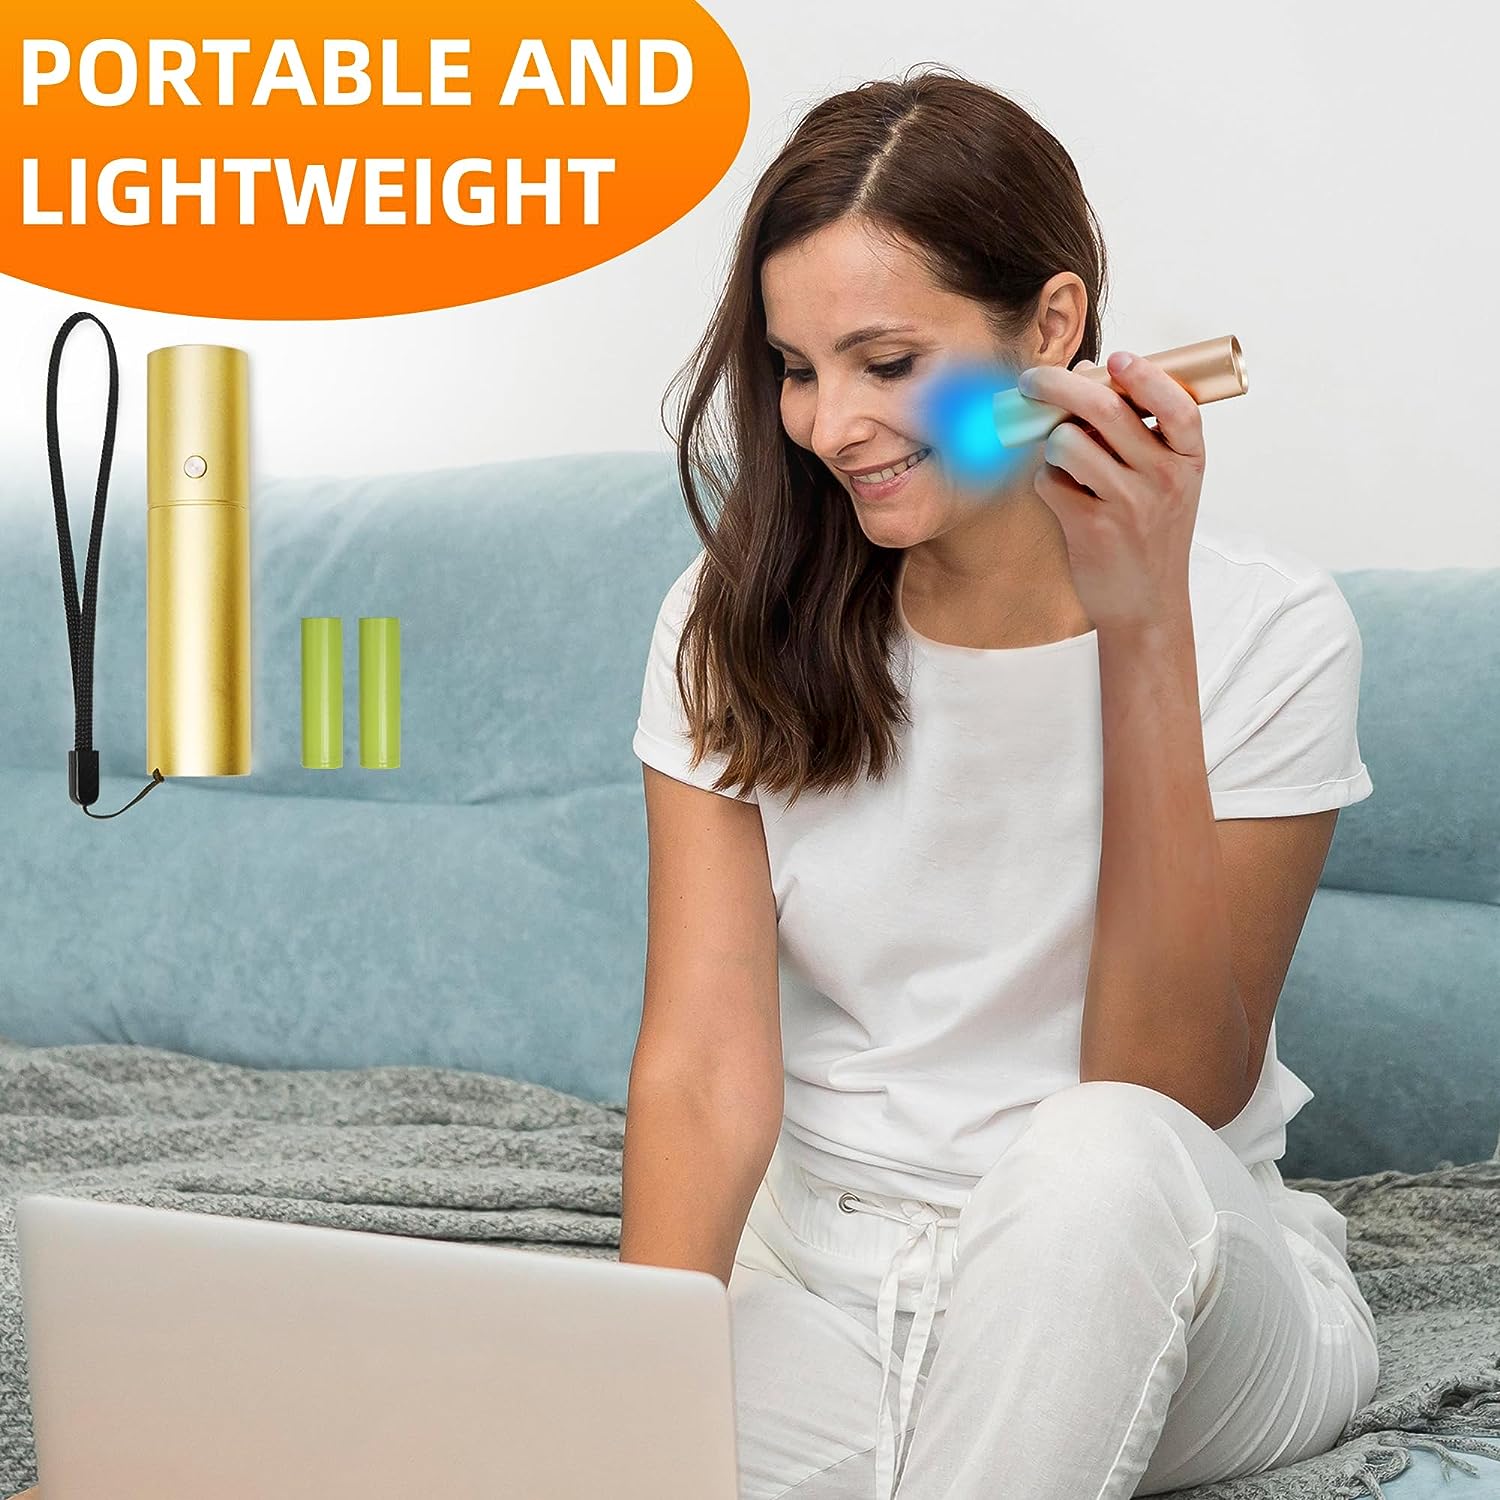 UTK Red Light Therapy Device with 5 Wavelengths - Purely Relaxation